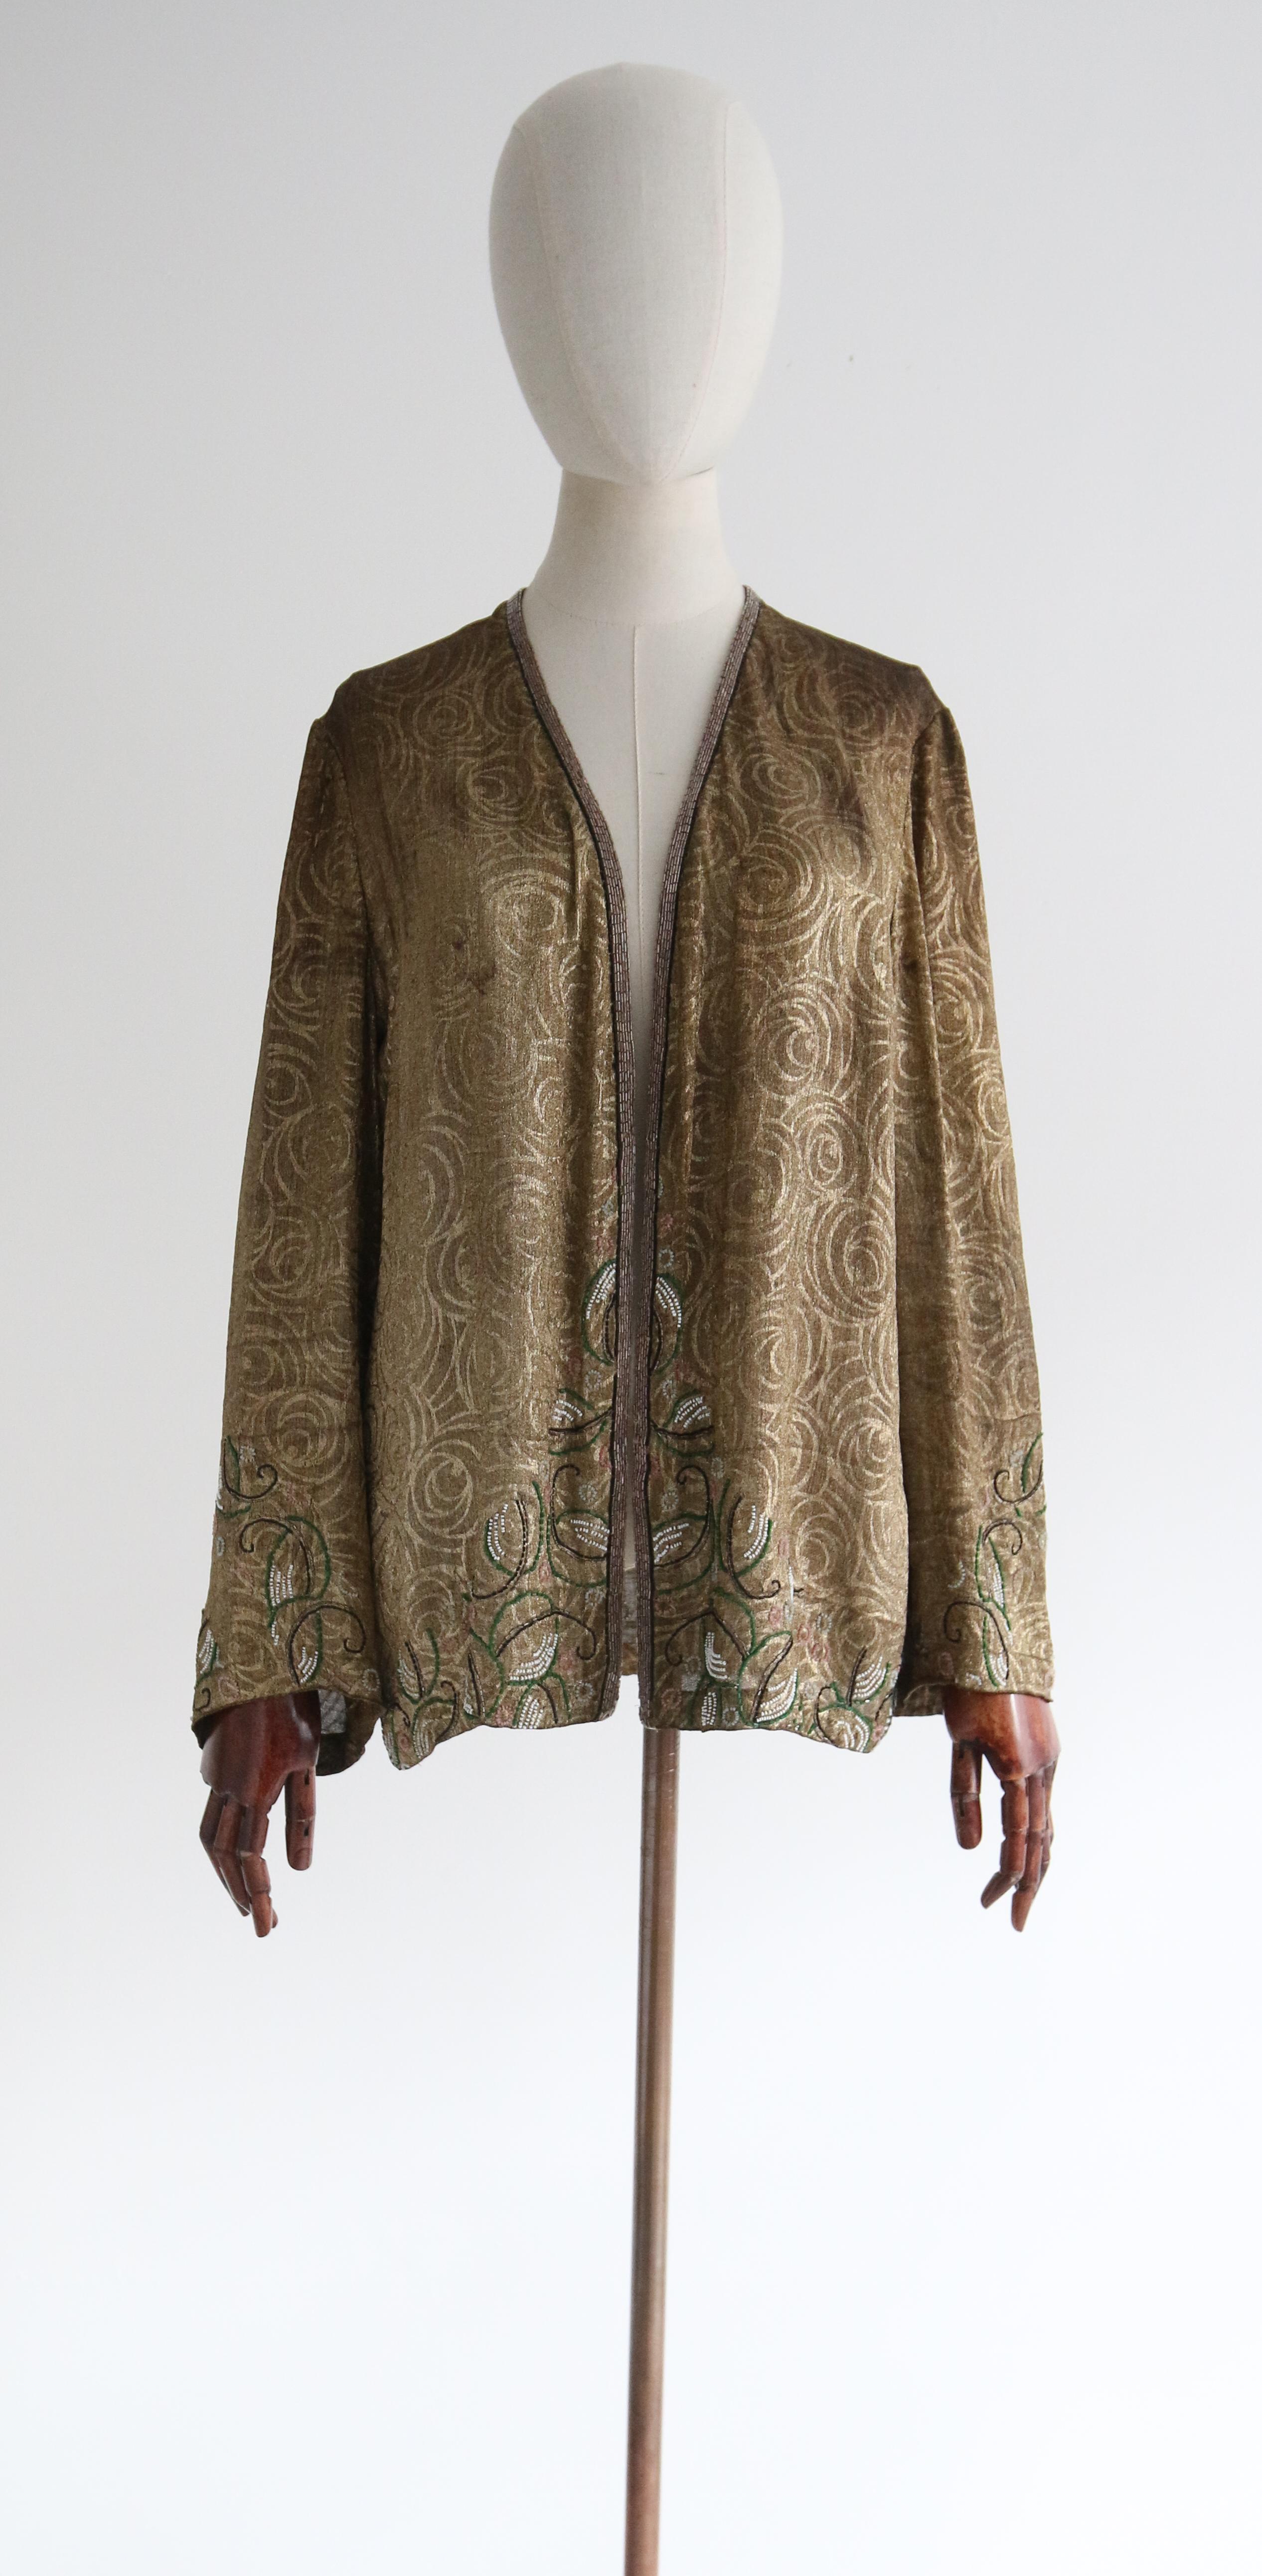 Full of opulent original details, this beautiful 1920's embellished jacket on a swirling gold lamé base is just the piece to add a touch of elegance to your wardrobe.  

The open neckline is set off by an edged to edge cut, fully embellished with a